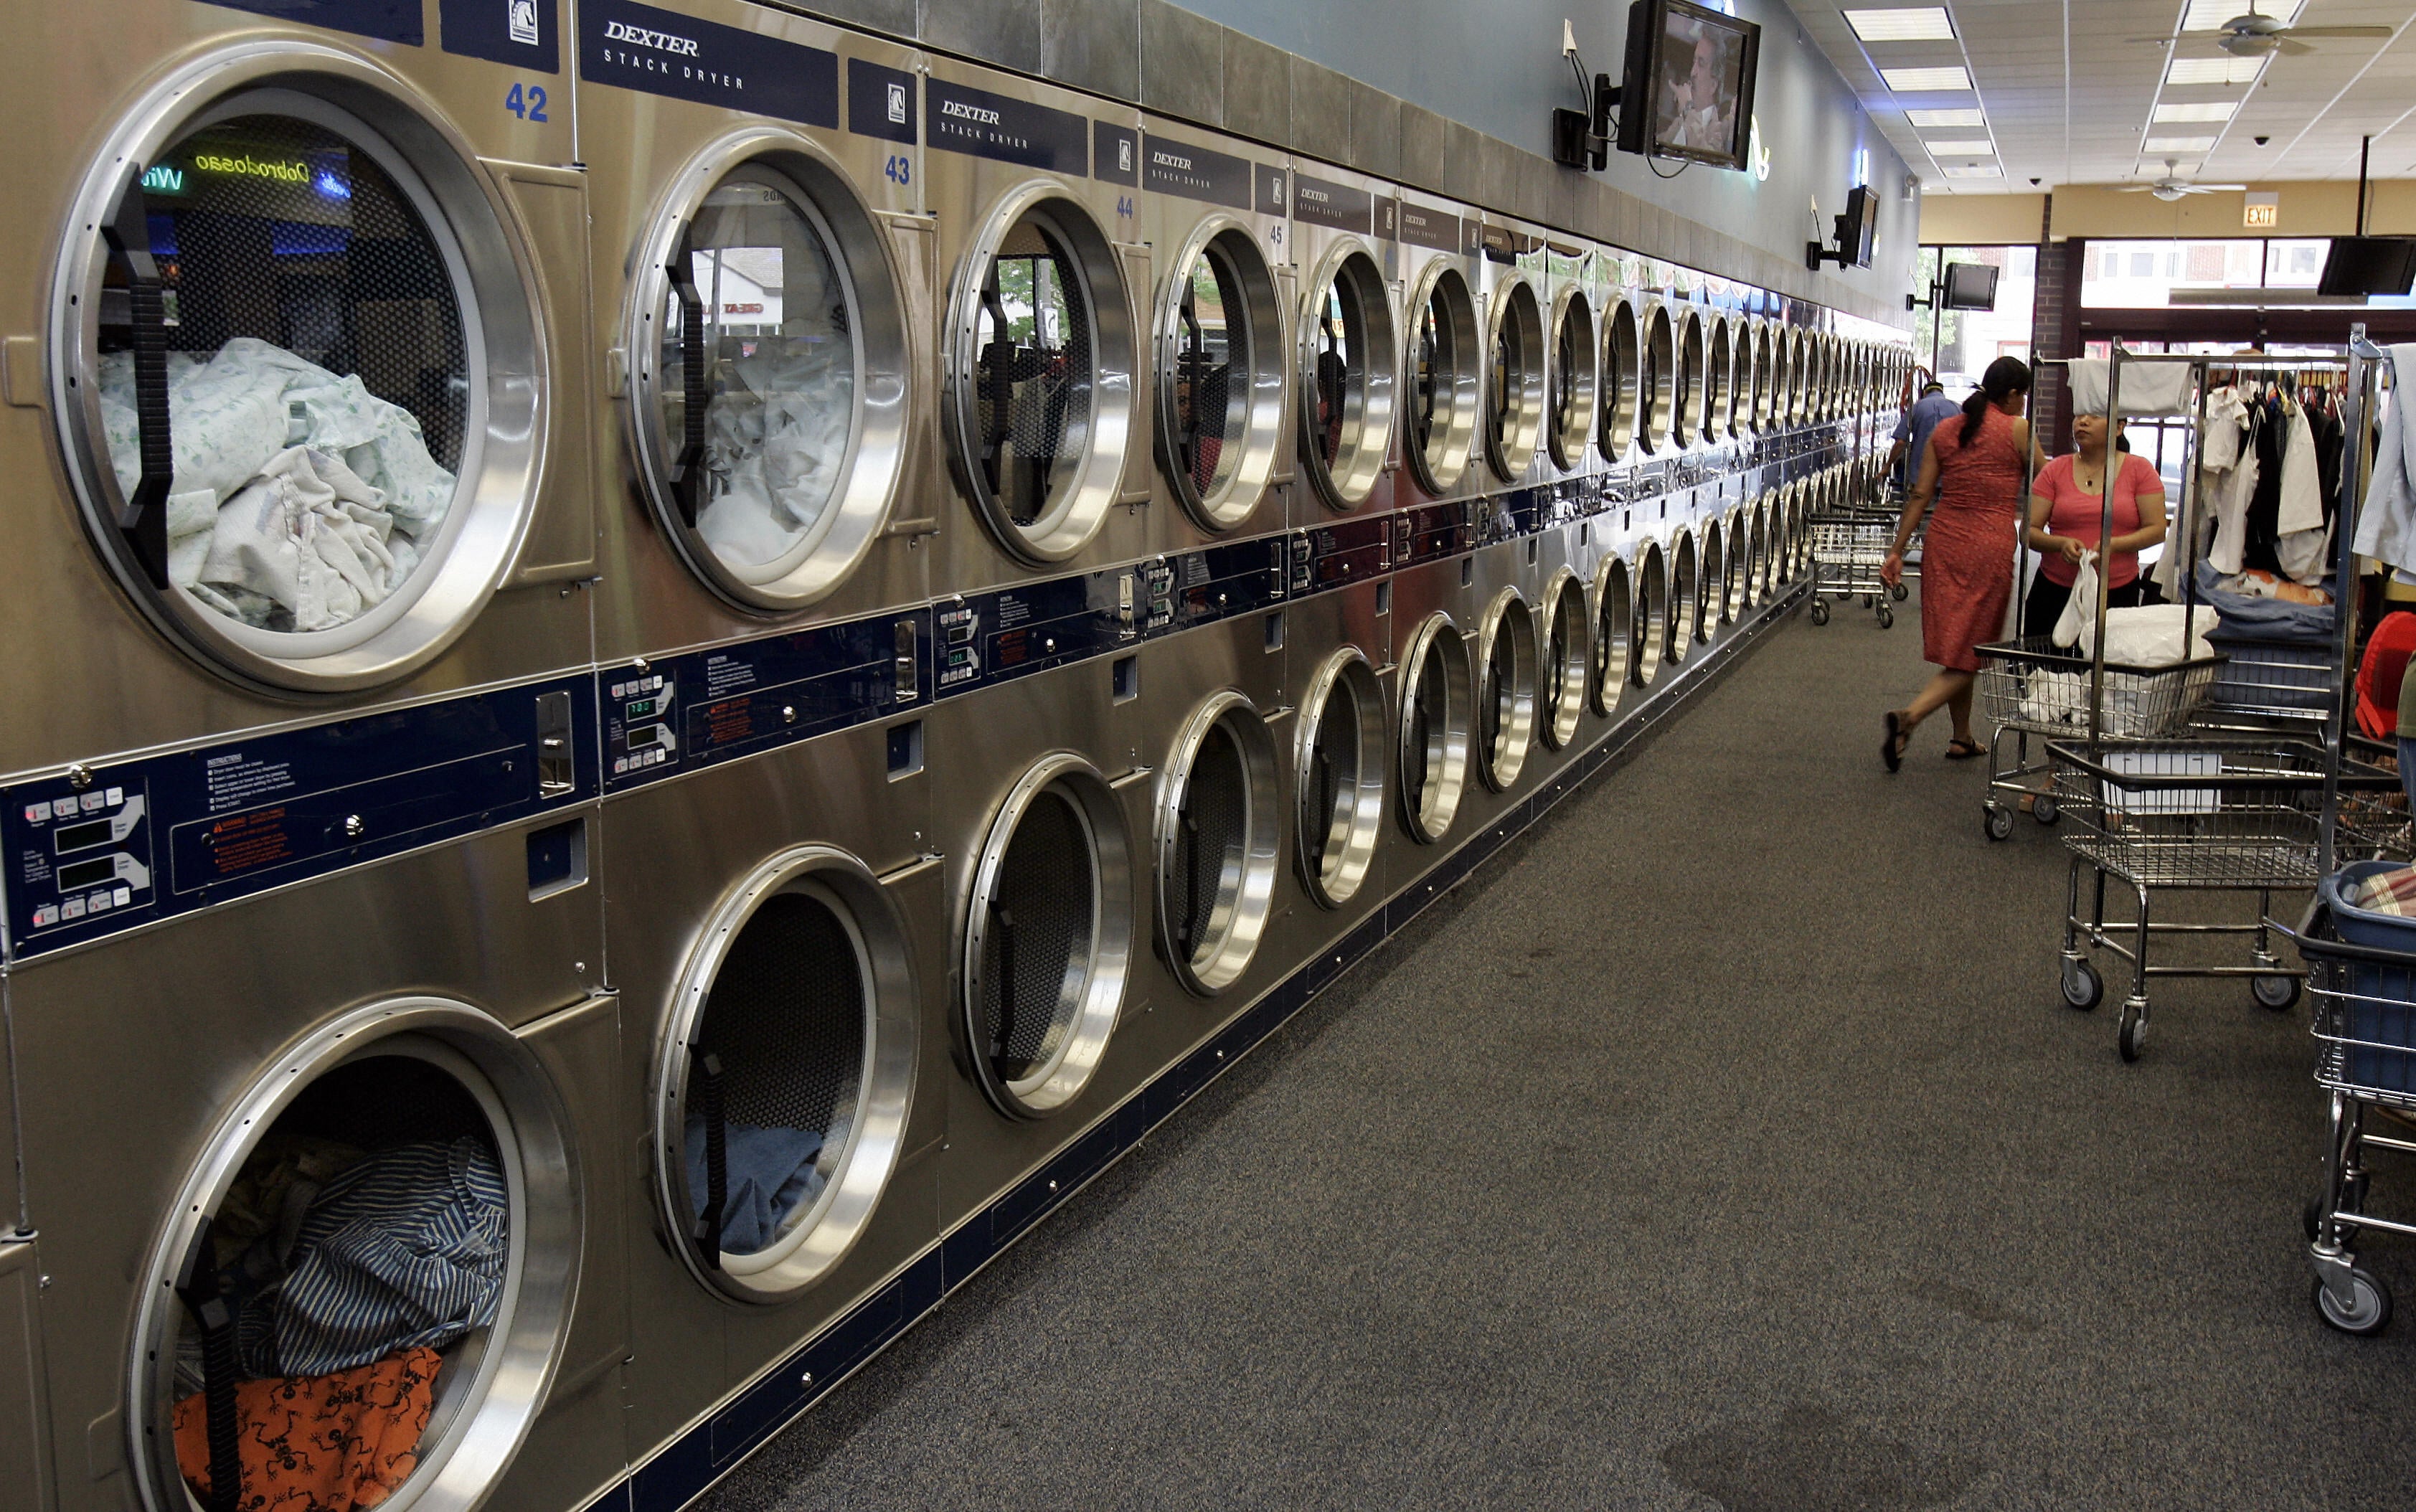 <p>The average UK adults will do around  13,000 loads of laundry in their lifetime </p>